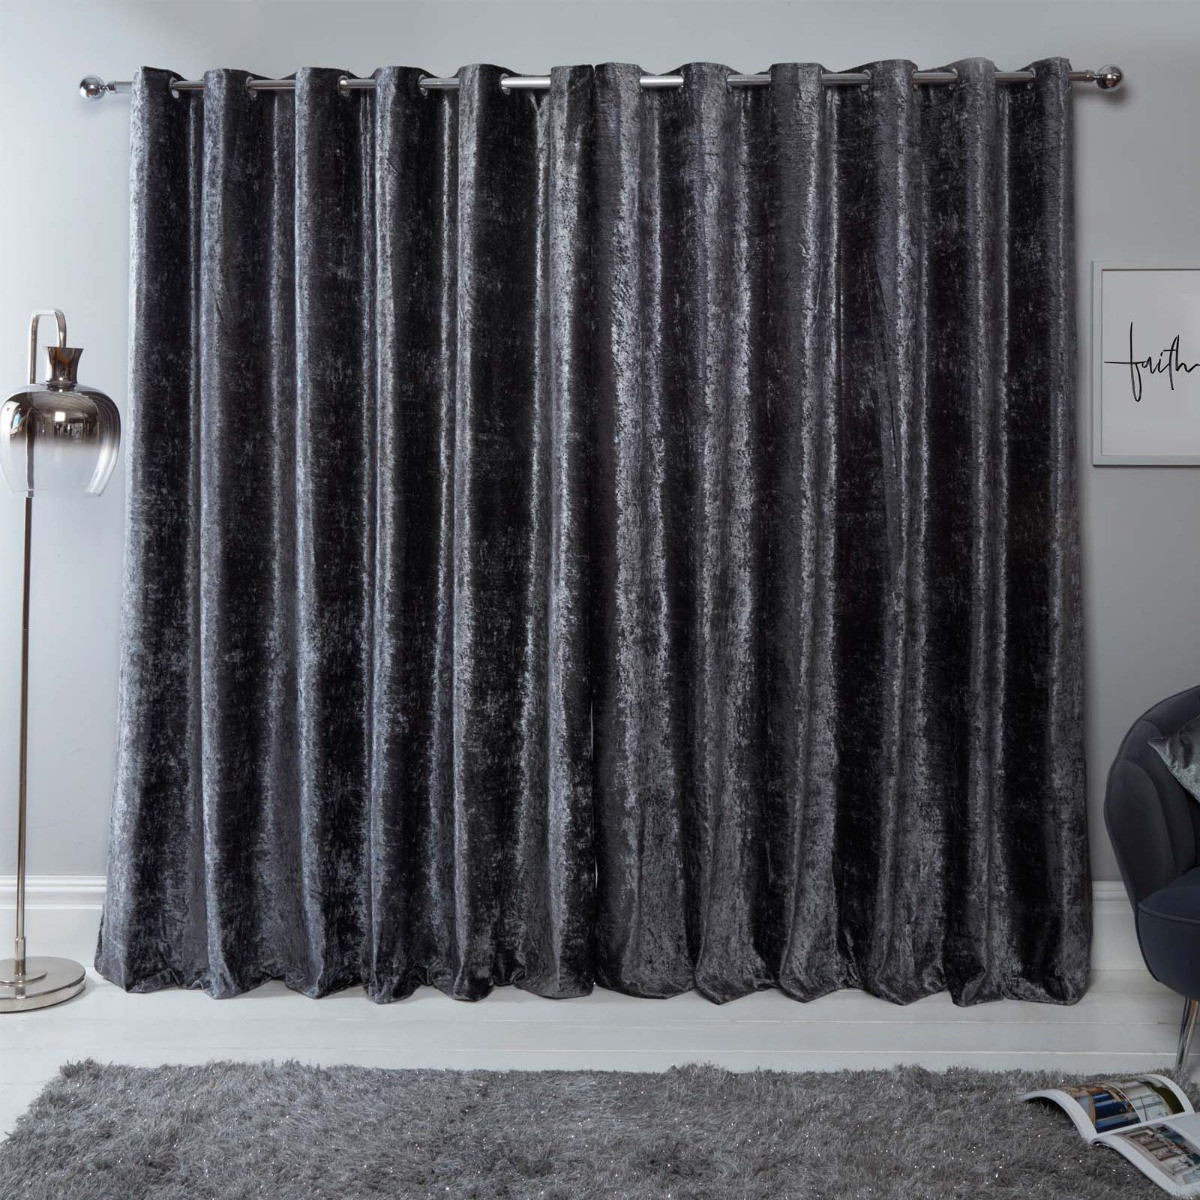 Sienna Home Crushed Velvet Eyelet Curtains - Charcoal Grey 46" x 90">